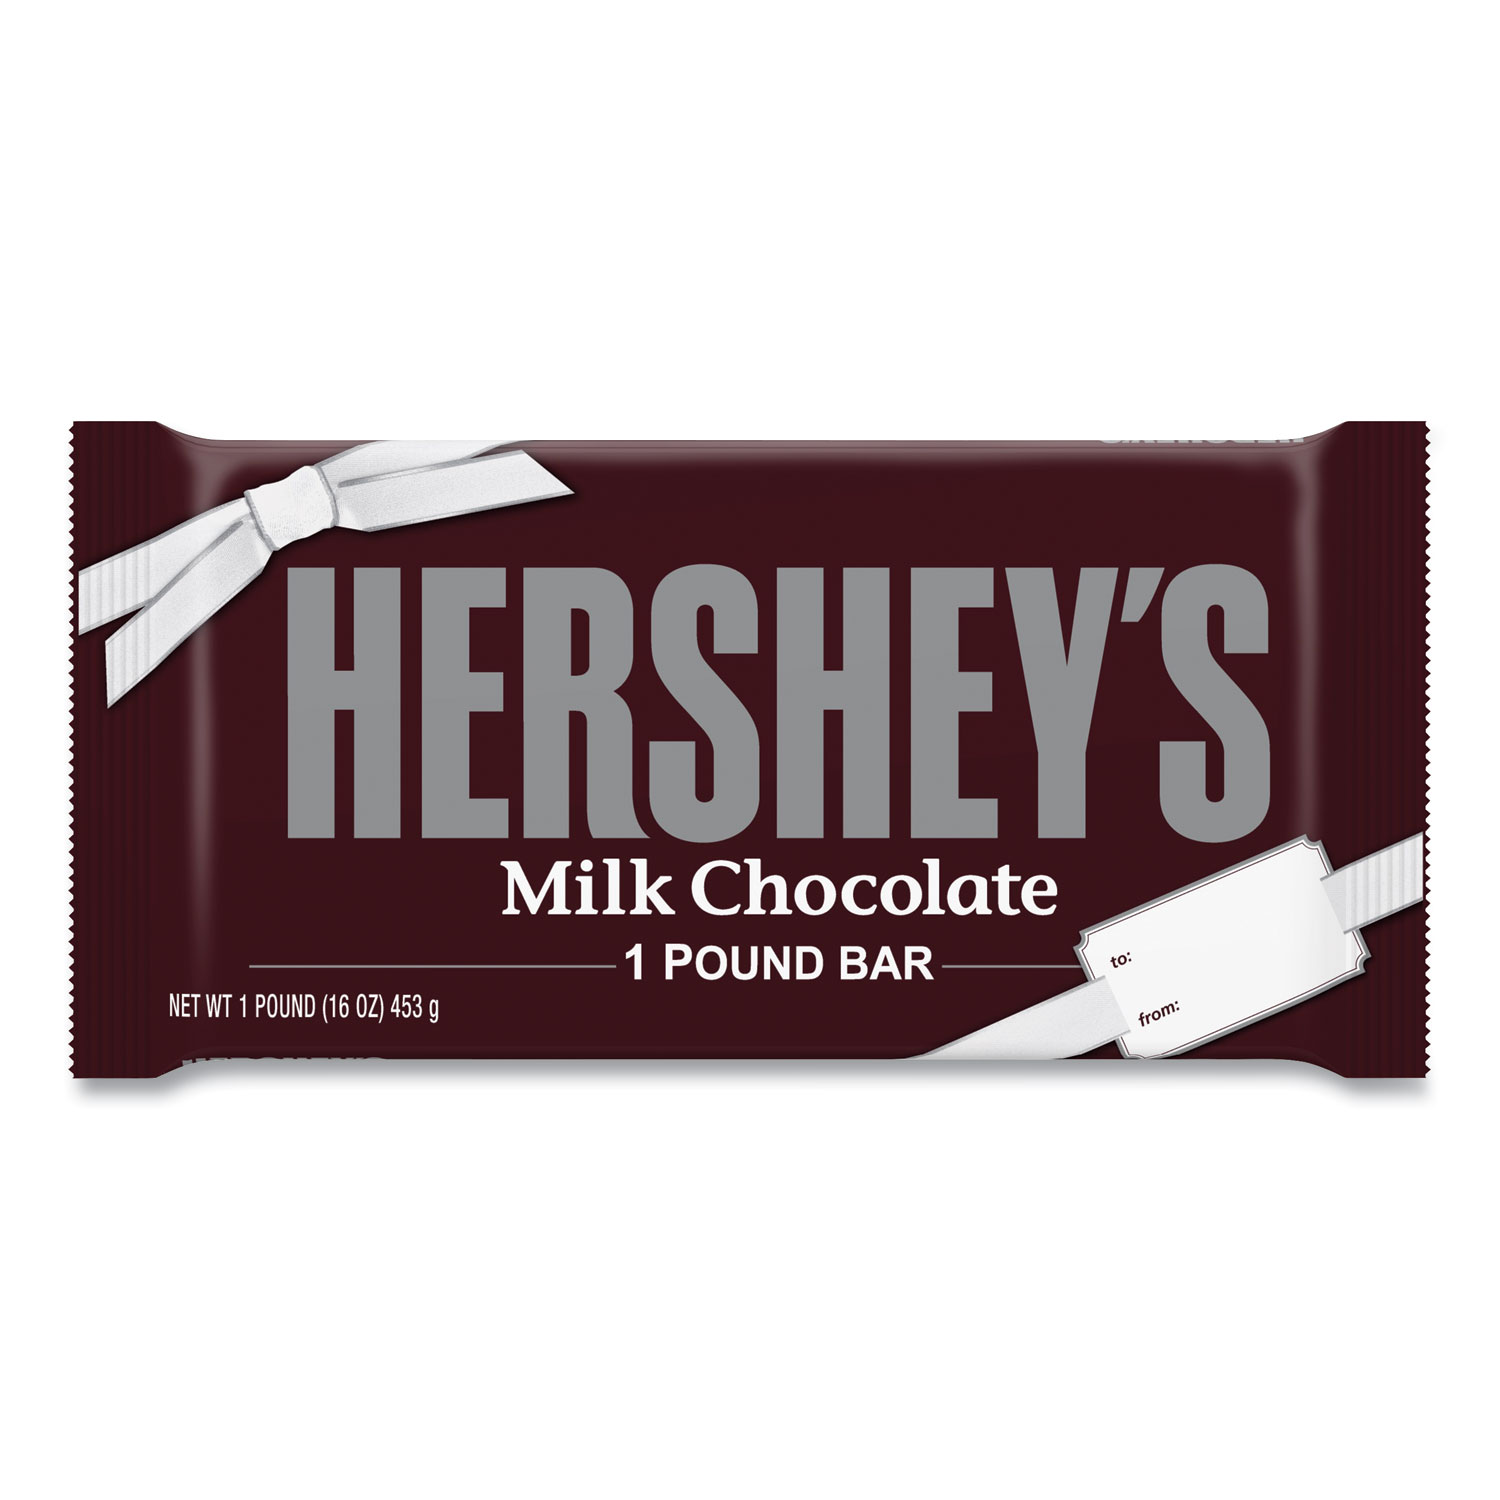  Hershey's 36304 Milk Chocolate Bar, 1 lb Bar, Free Delivery in 1-4 Business Days (GRR24600128) 